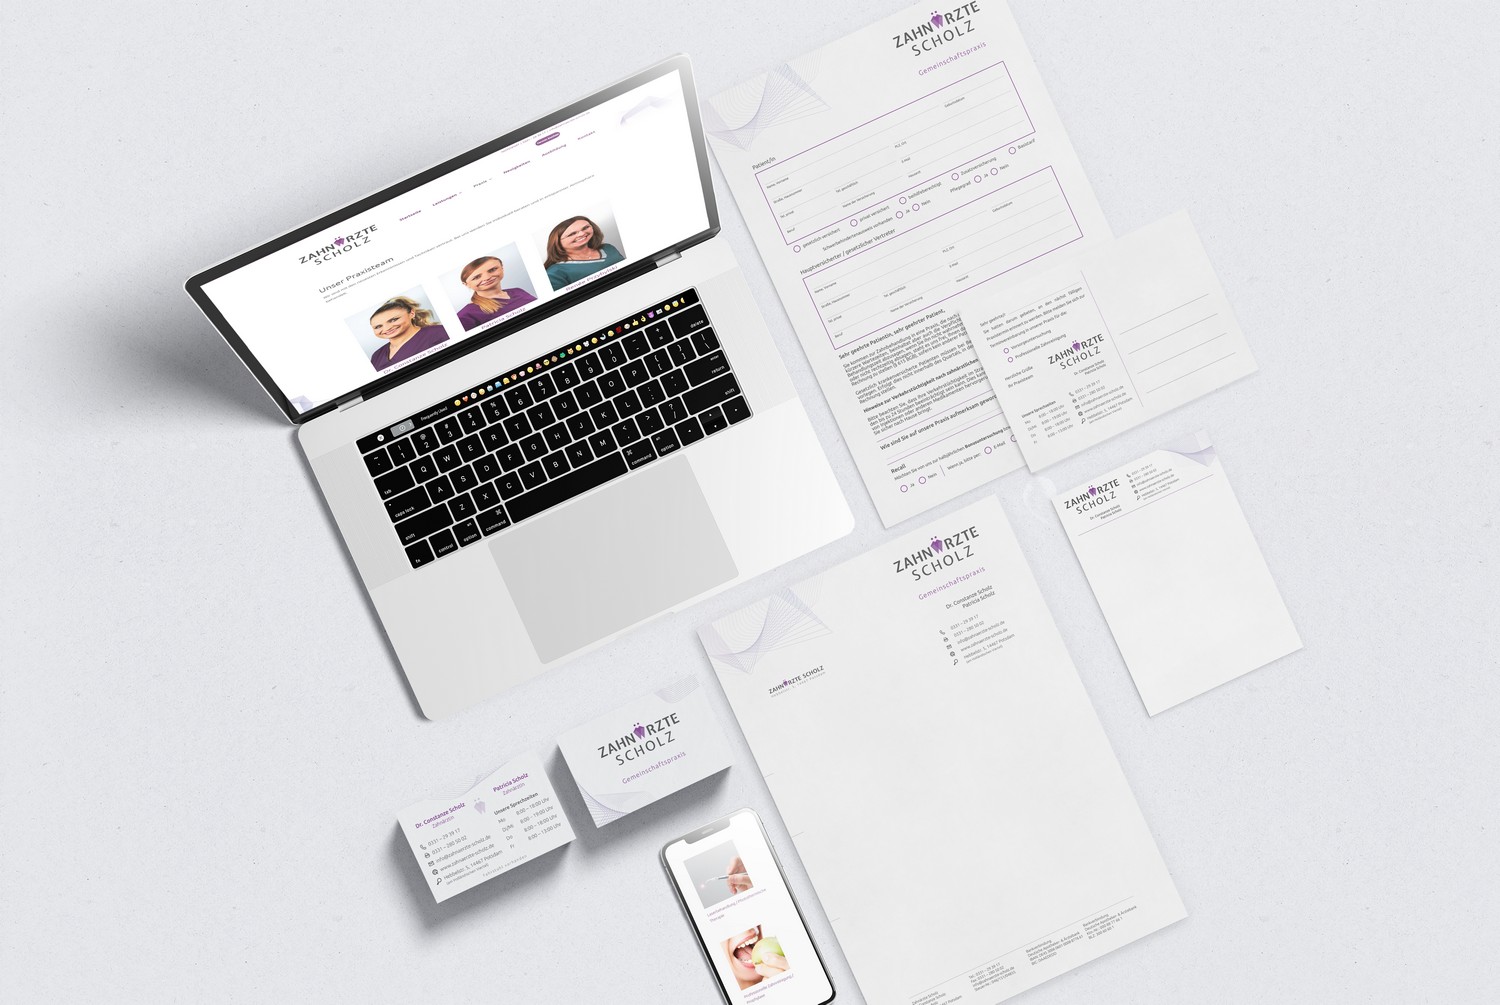 Brand new marketing and business material including new website created by a web design company for dentists, as shown in this perspective view: You can see a laptop with the new website next to various documents, which also shine in fresh corporate identity.